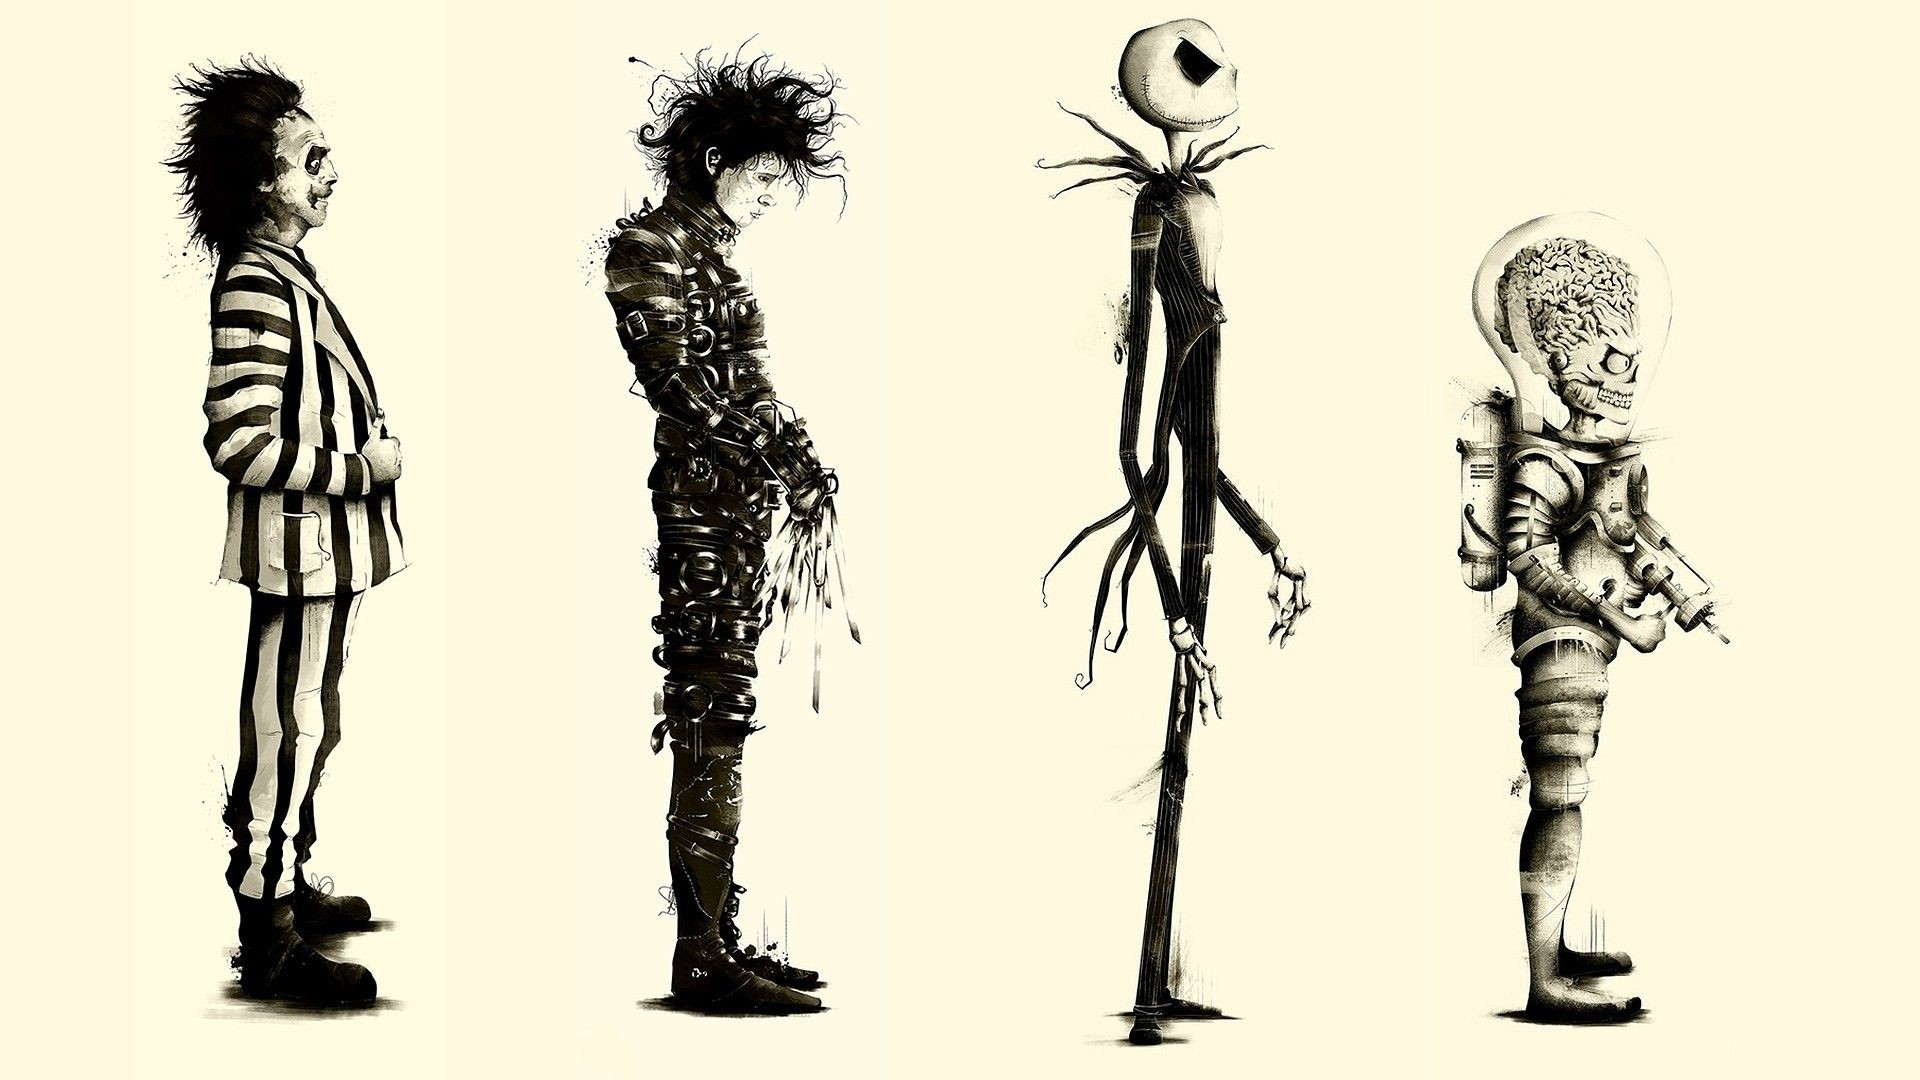 1920x1080 Download hd wallpapers of 111808-Tim Burton, Movies, Beetlejuice, Fan Art,  Edward Scissorhands, Mars Attacks. Free download High Quality and  Widescreen Res